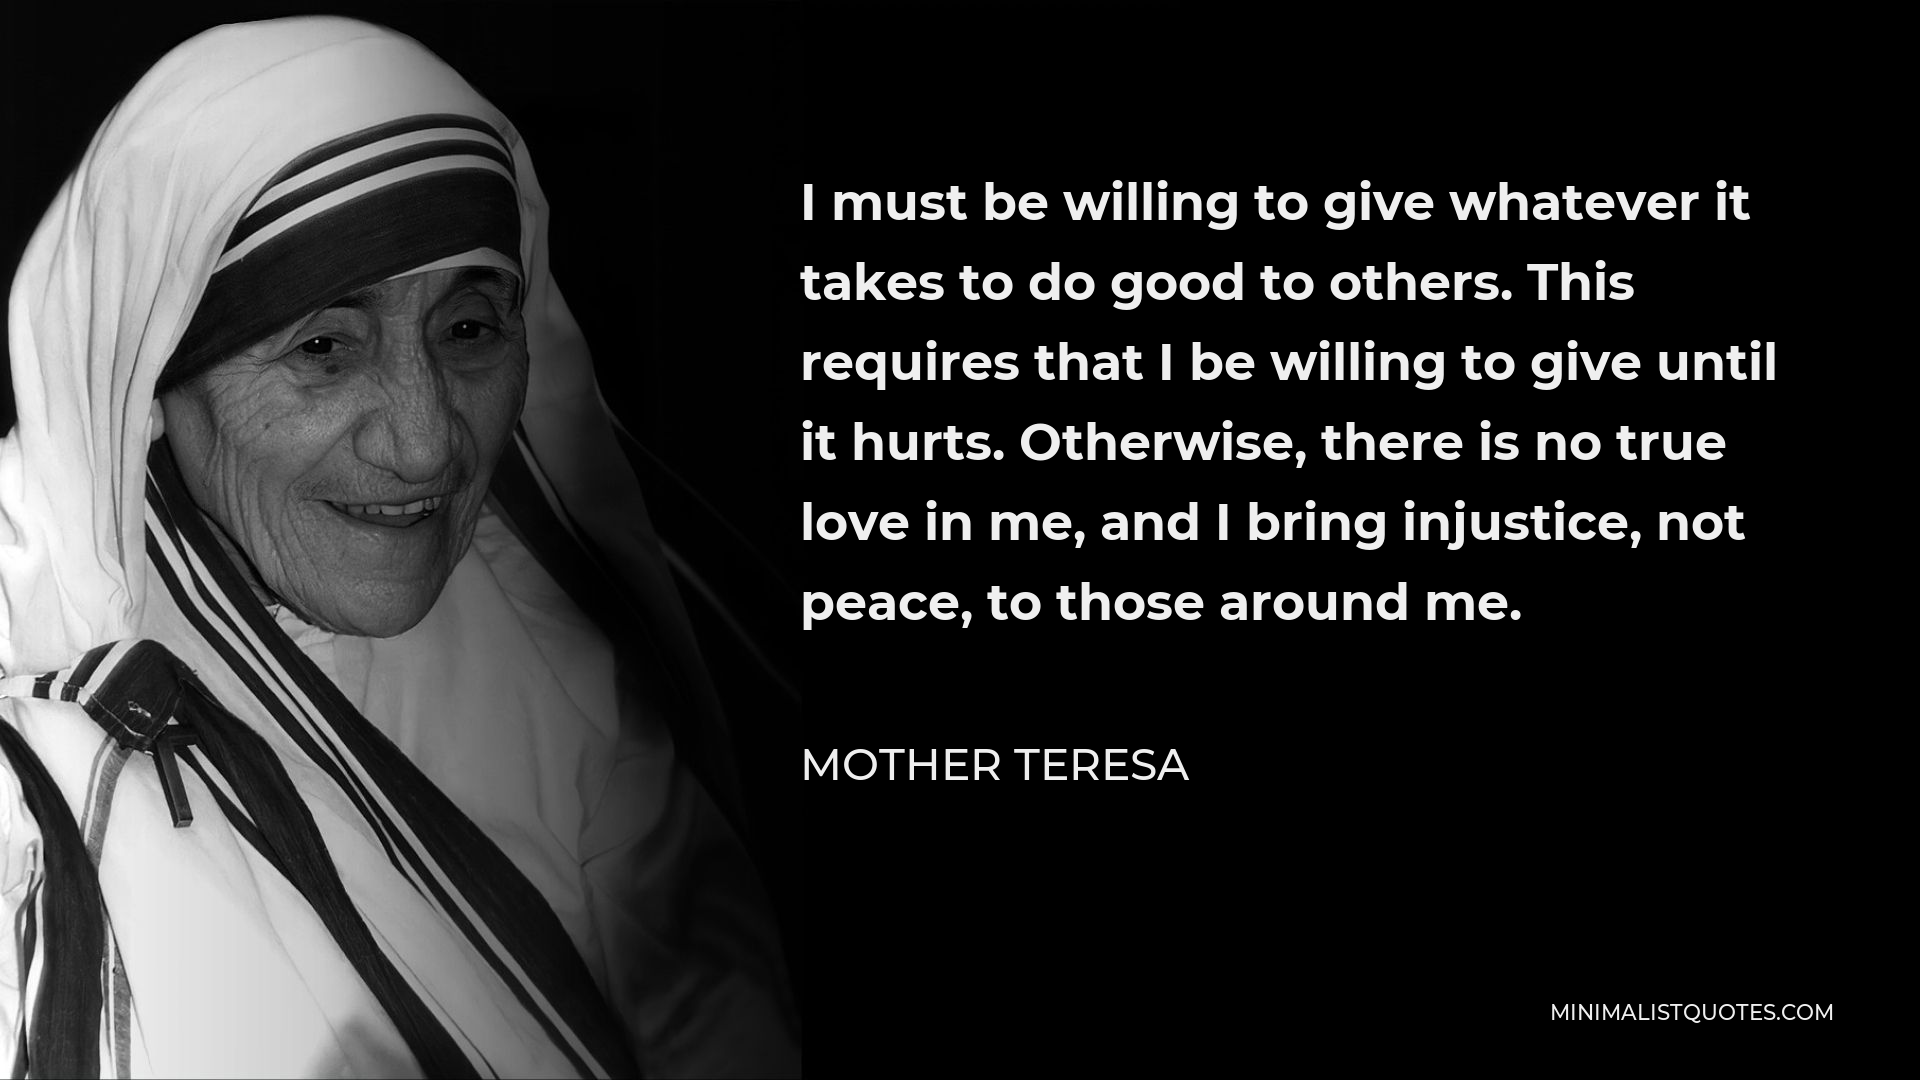 Mother Teresa Quote - I must be willing to give whatever it takes to do good to others. This requires that I be willing to give until it hurts. Otherwise, there is no true love in me, and I bring injustice, not peace, to those around me.